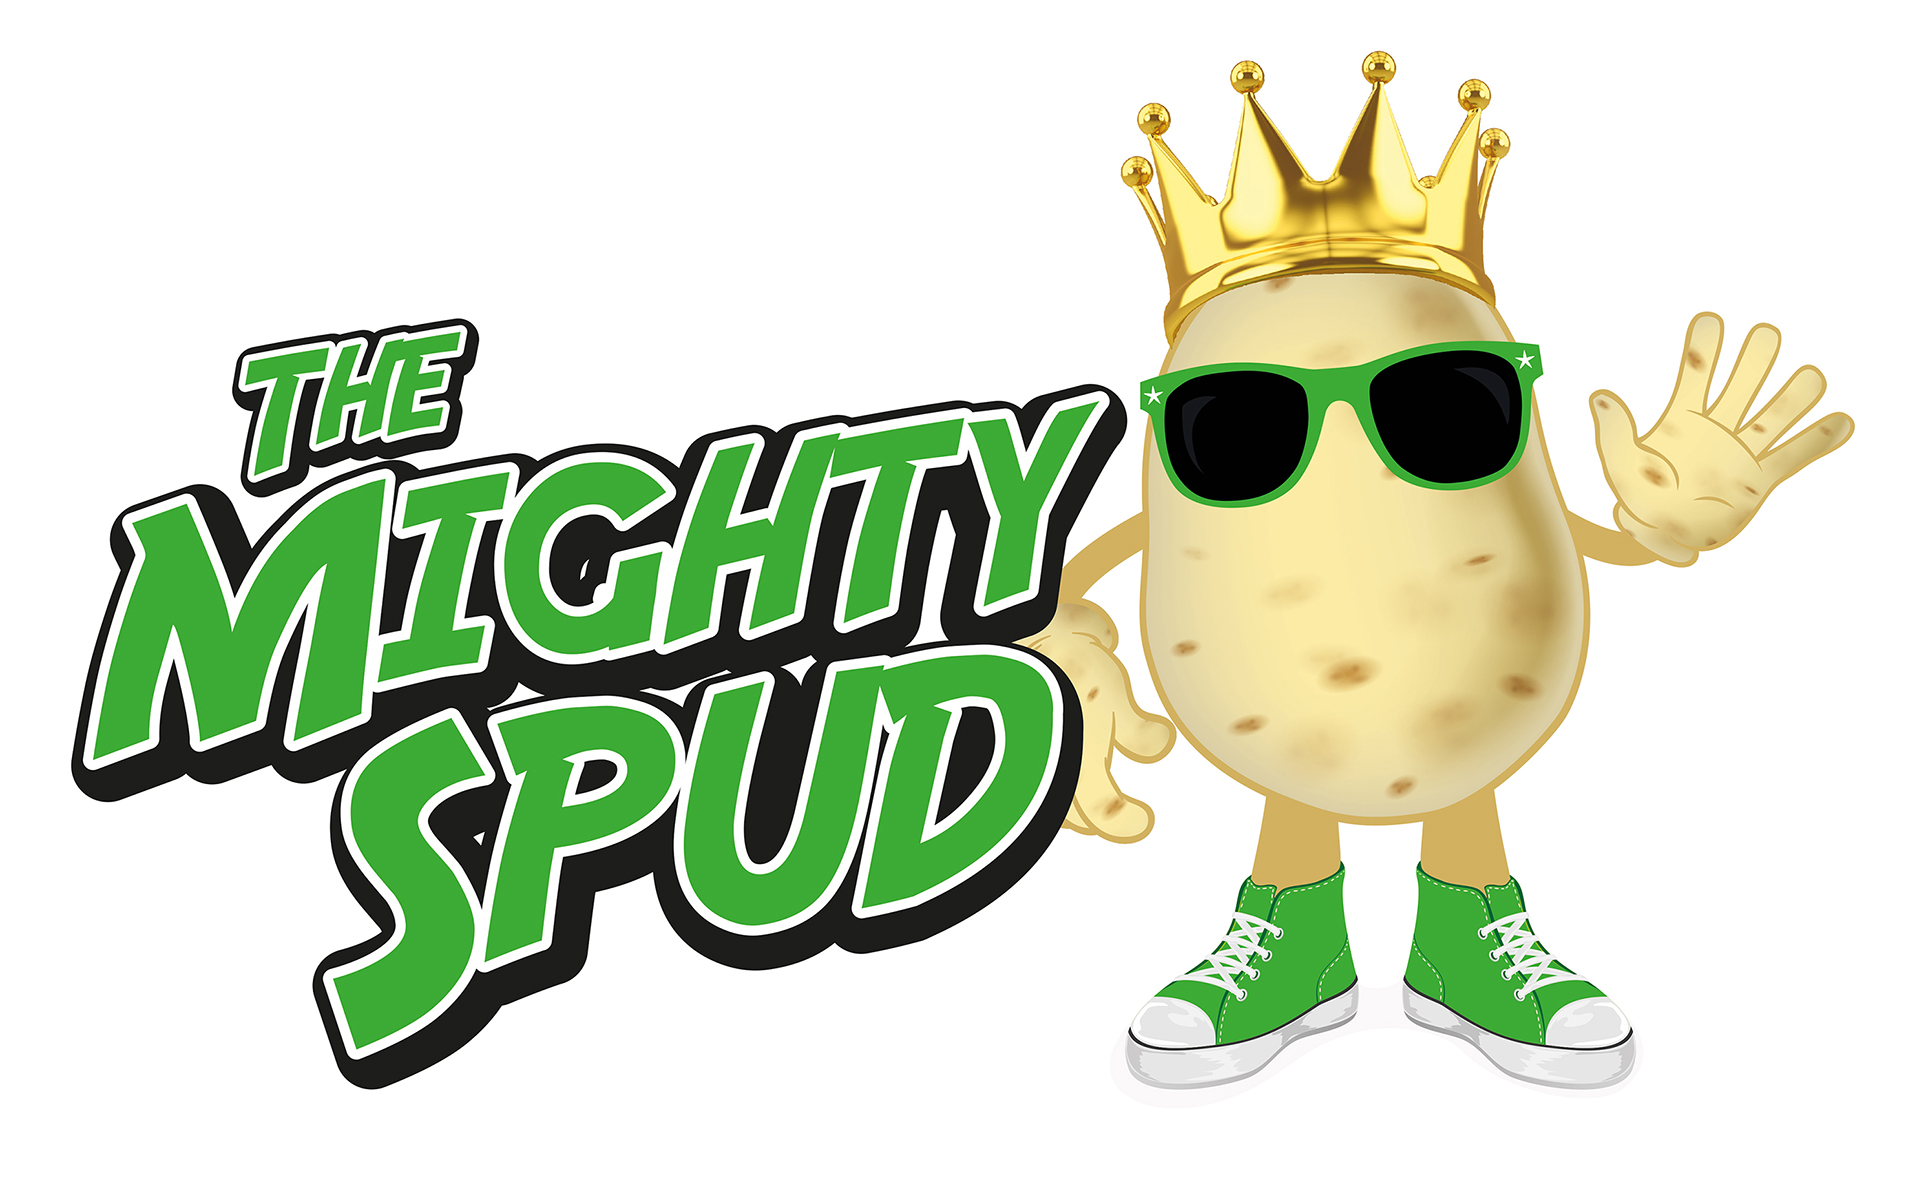 All Hail The Mighty Spud - Morrow Communications